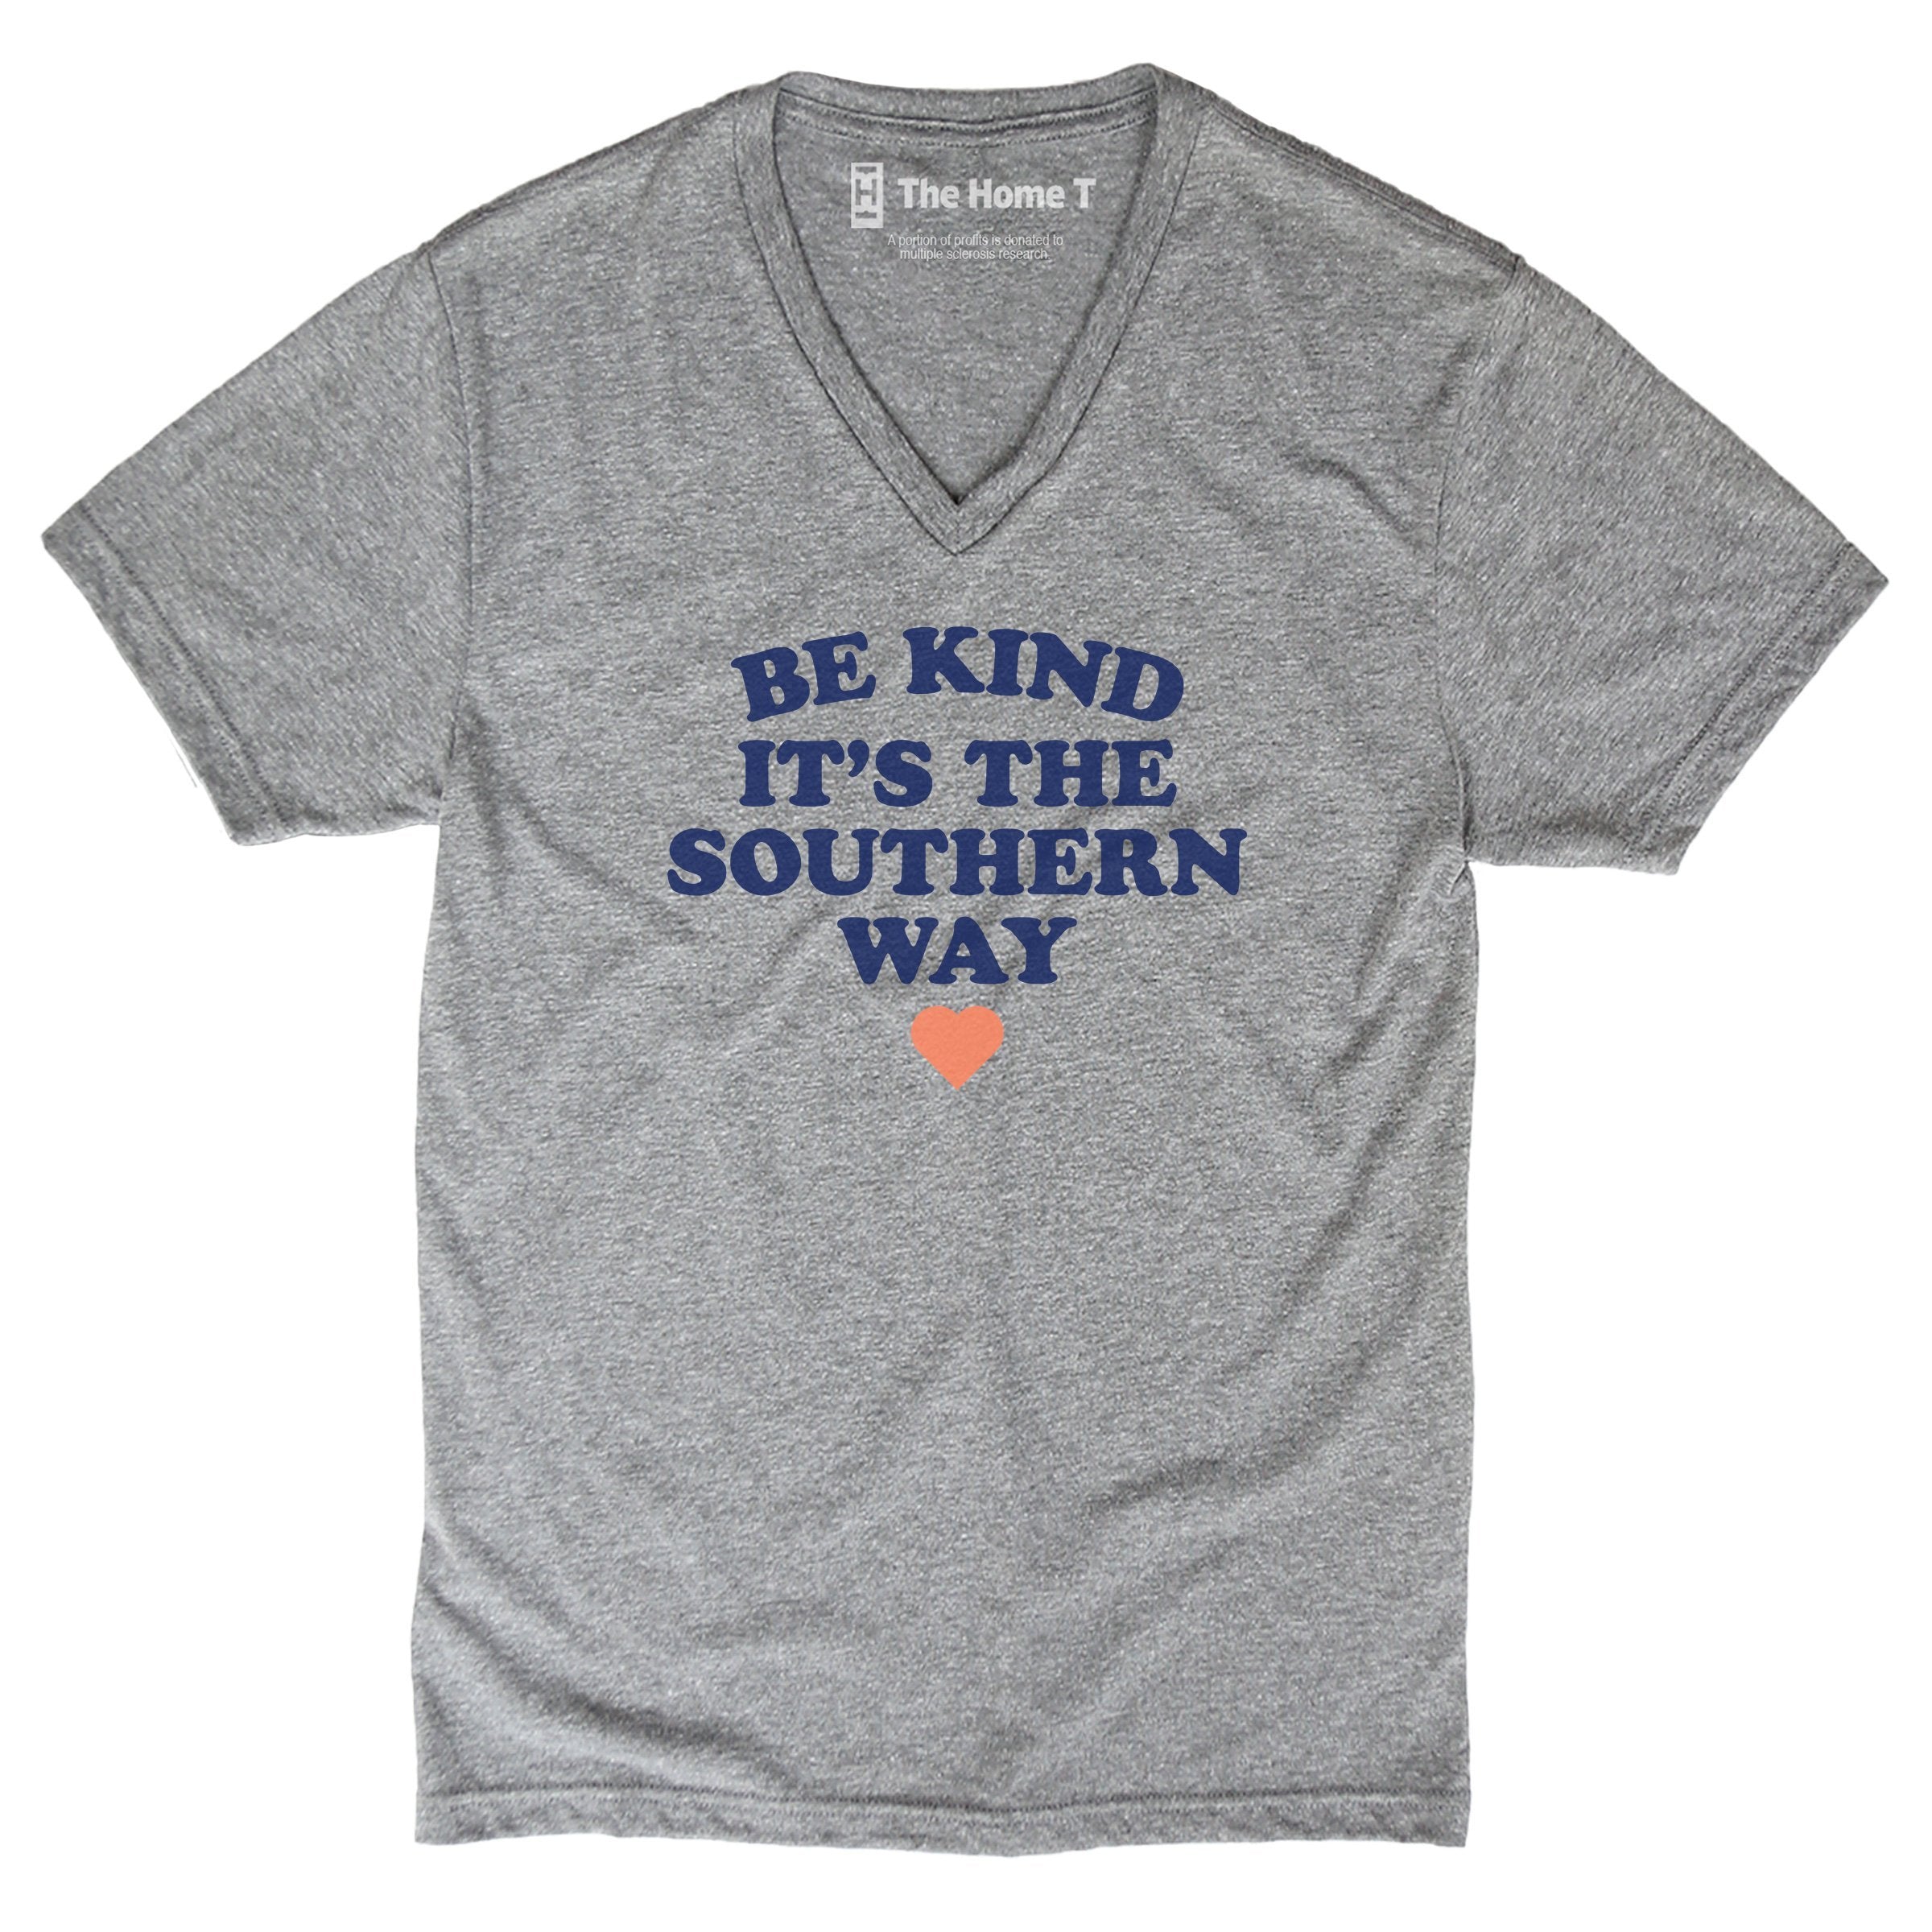 Be Kind It's the Southern Way Crew neck The Home T XS V Neck